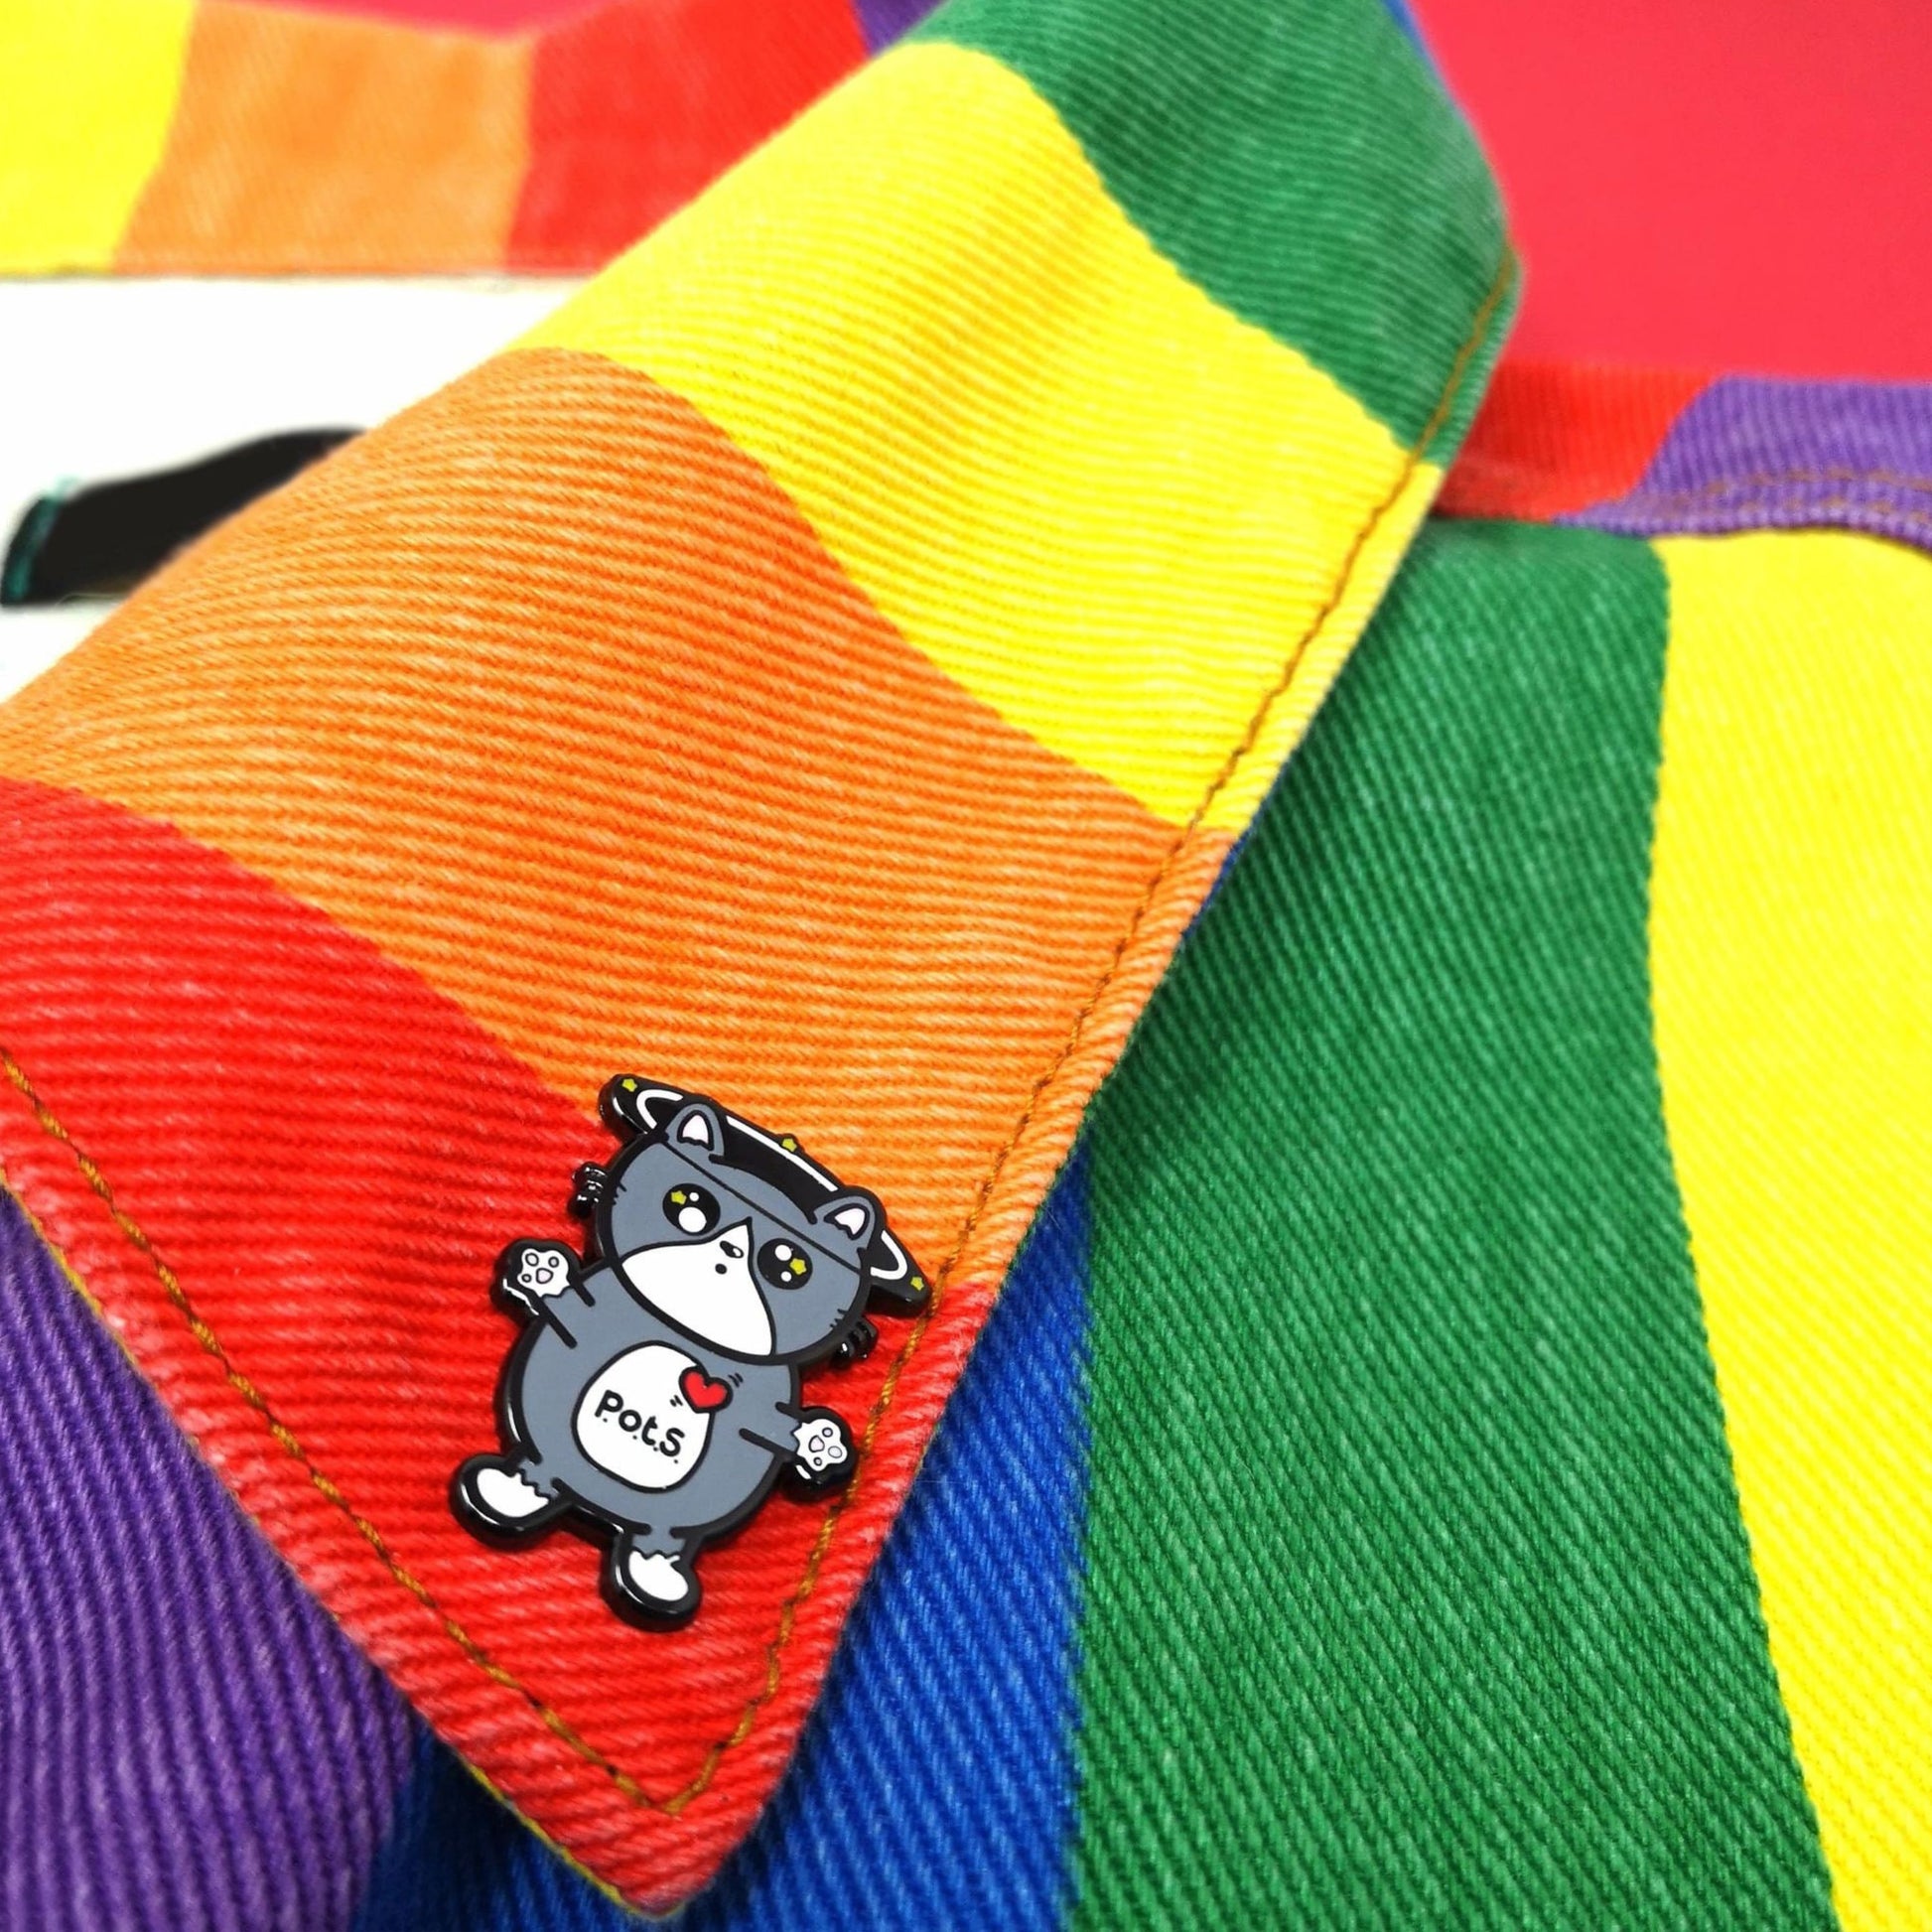 An enamel pin of a cat illustration with spinning dizzy stars around its head with its paws outstretched and postural tachycatdid syndrome (pots) written on its belly it is on a rainbow denim jacket collar. Postural tachycardia syndrome (PoTS) is when your heart rate increases very quickly after getting up from sitting or lying down.